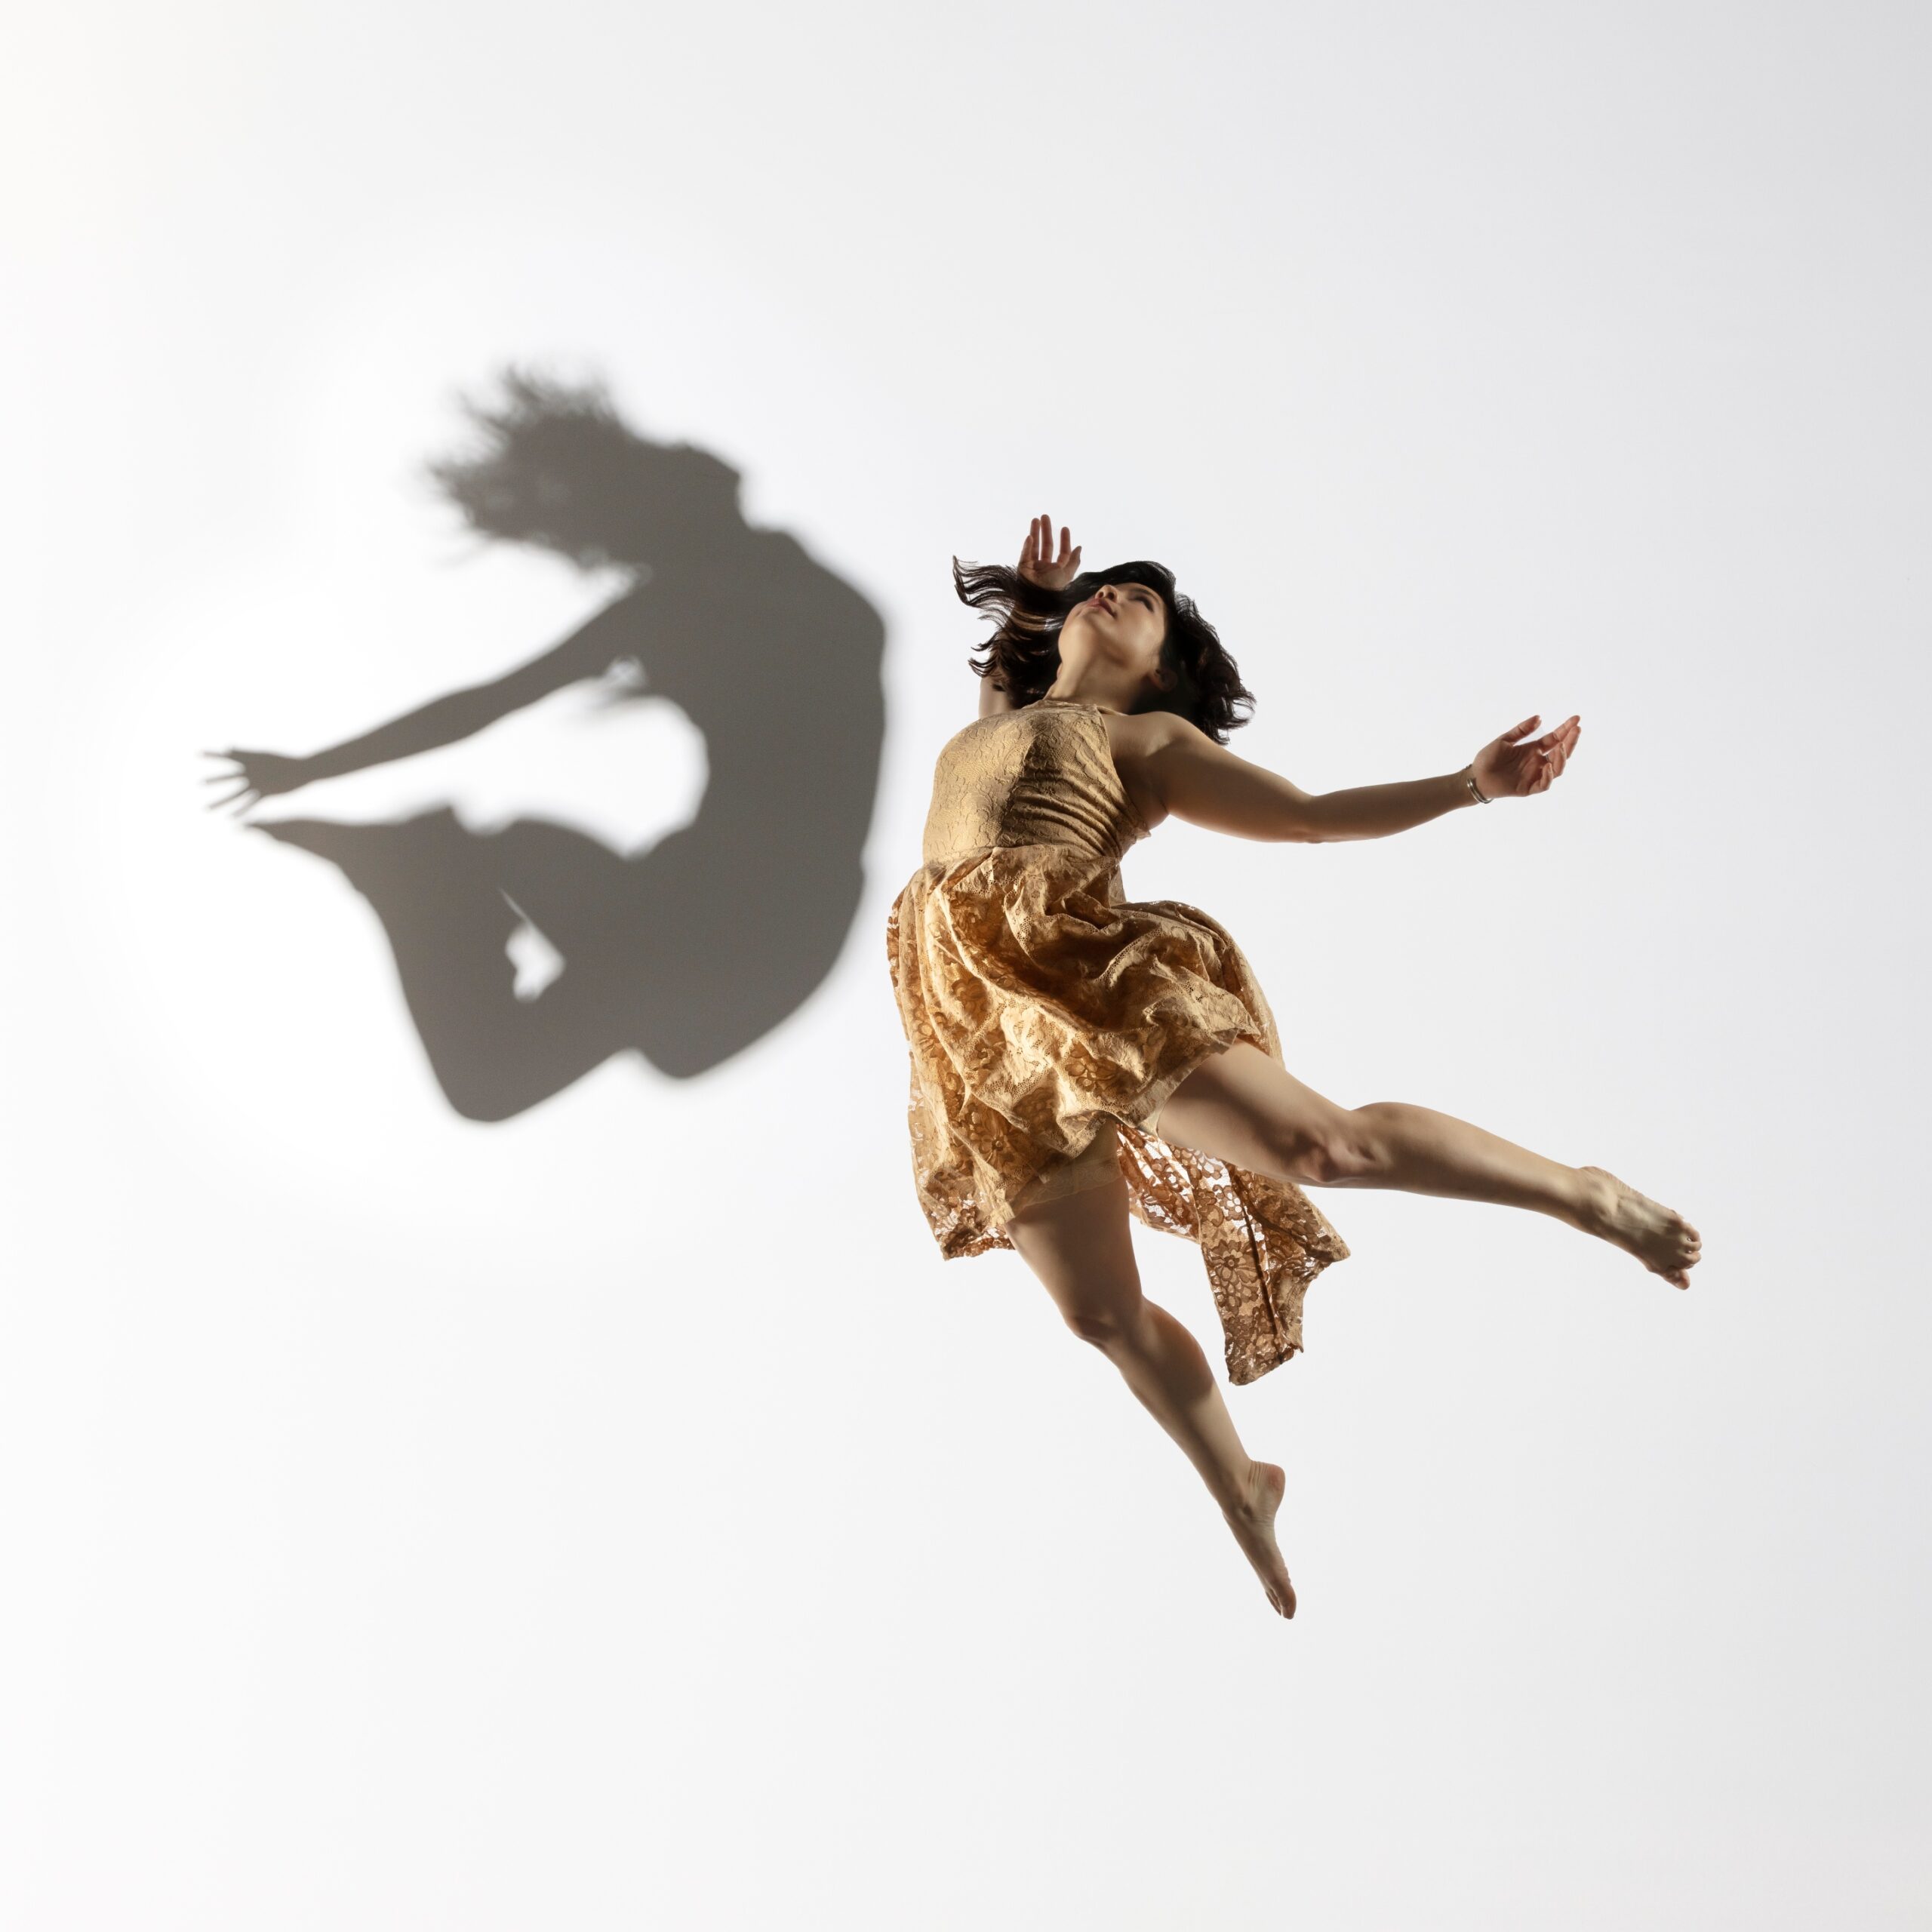 Megan Lowe jumps into the air with her back arched, arms and legs reaching behind her. The shadow of Shira Yaziv is floating above her.